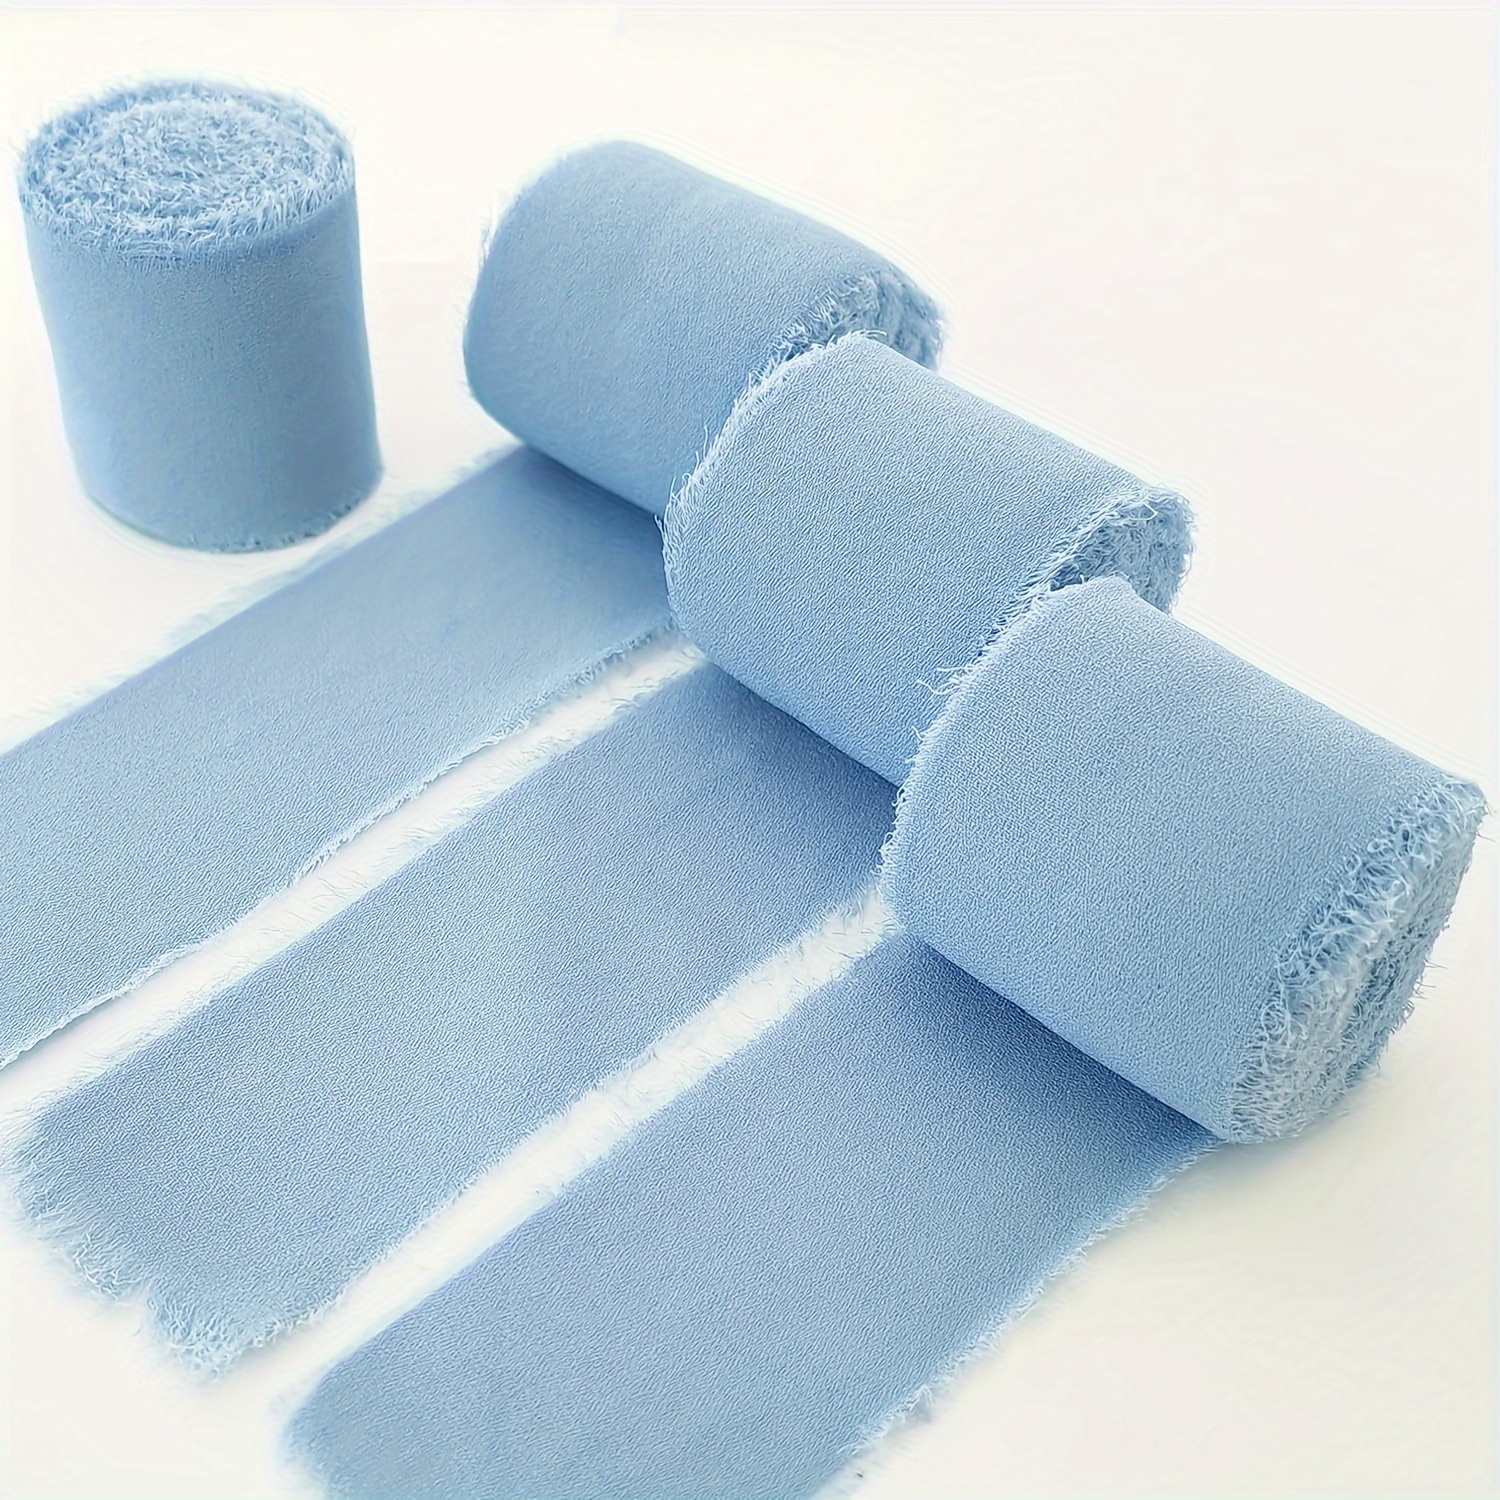 

Blue Chiffon Ribbon Set, Frayed Edges, 3 Rolls, 1.5" X 21 Yards - Perfect For Wedding Invitations, Bridal Bouquets & Gift Wrapping